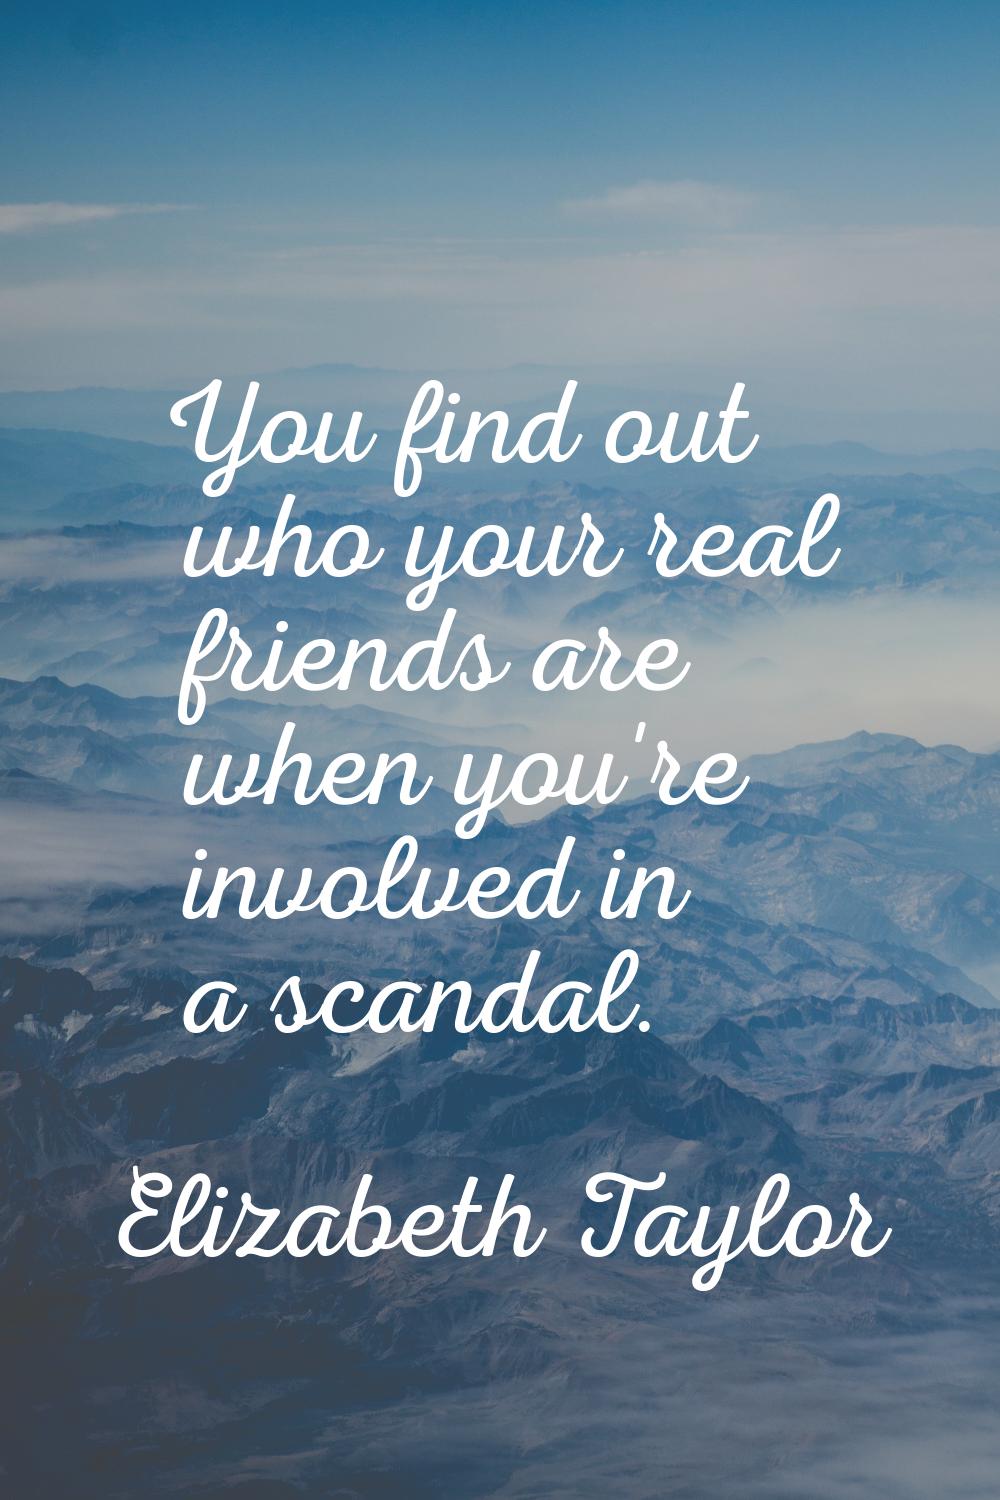 You find out who your real friends are when you're involved in a scandal.